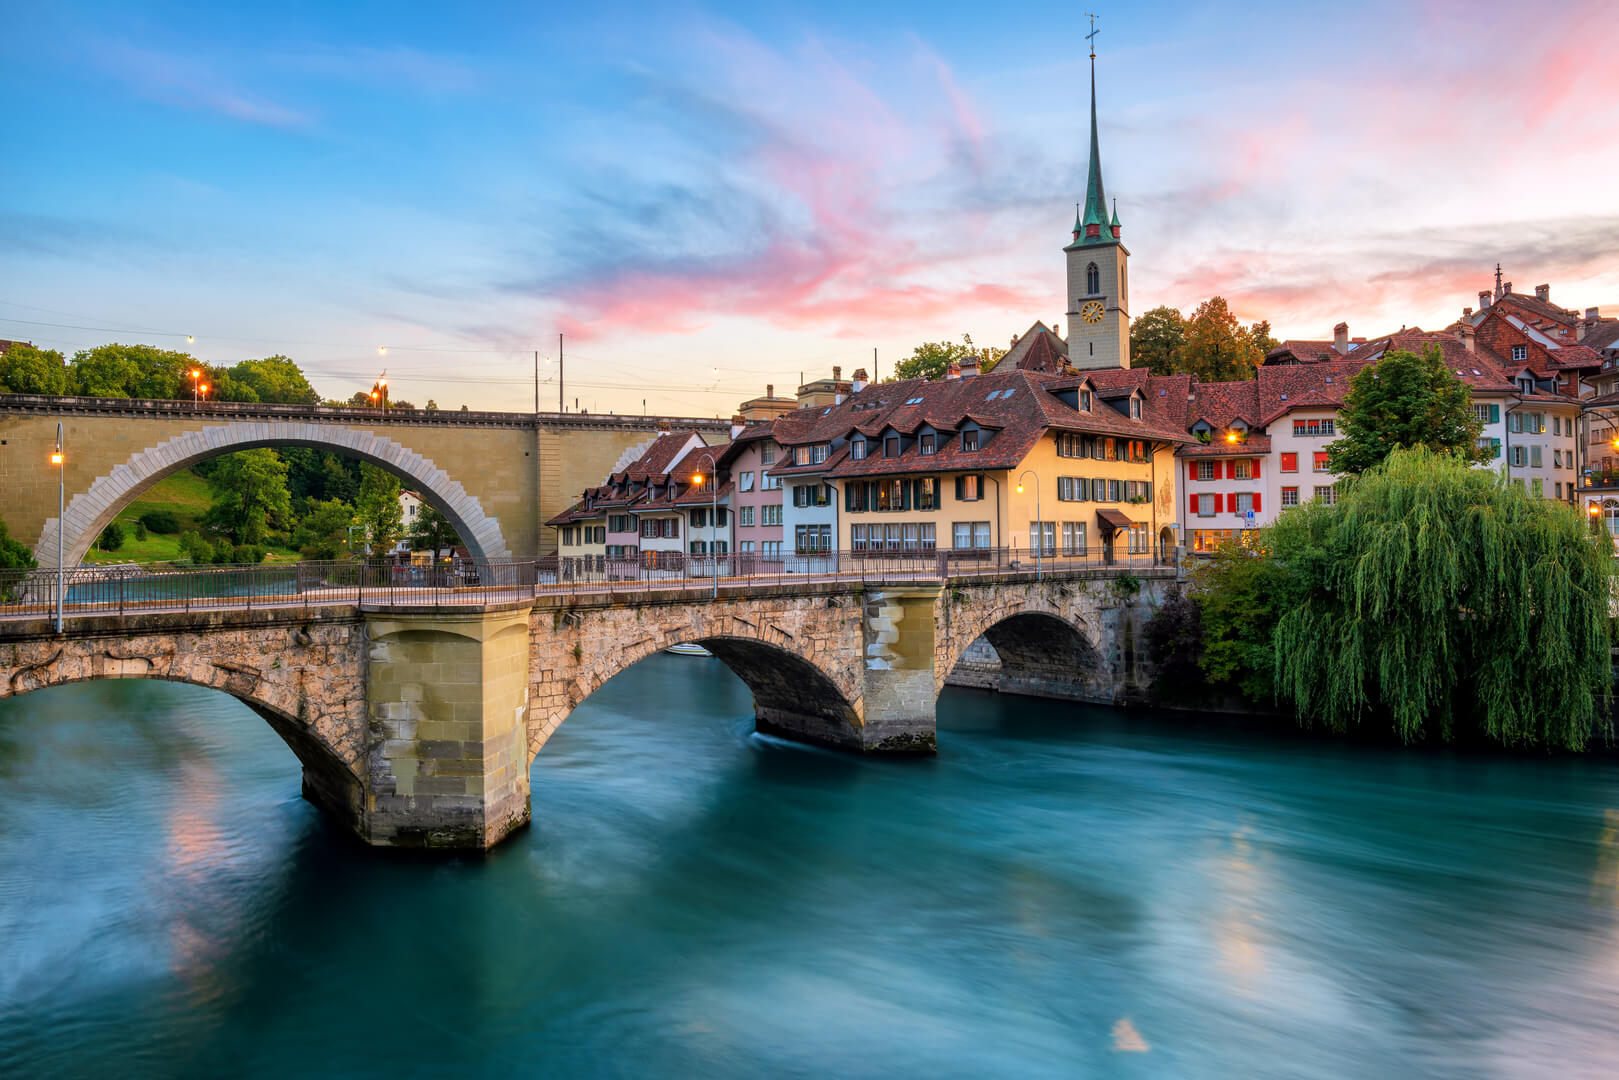 Historical Old Town of Bern city, tiled roofs, bridges over Aare river and church tower on dramatic sunset, Switzerland